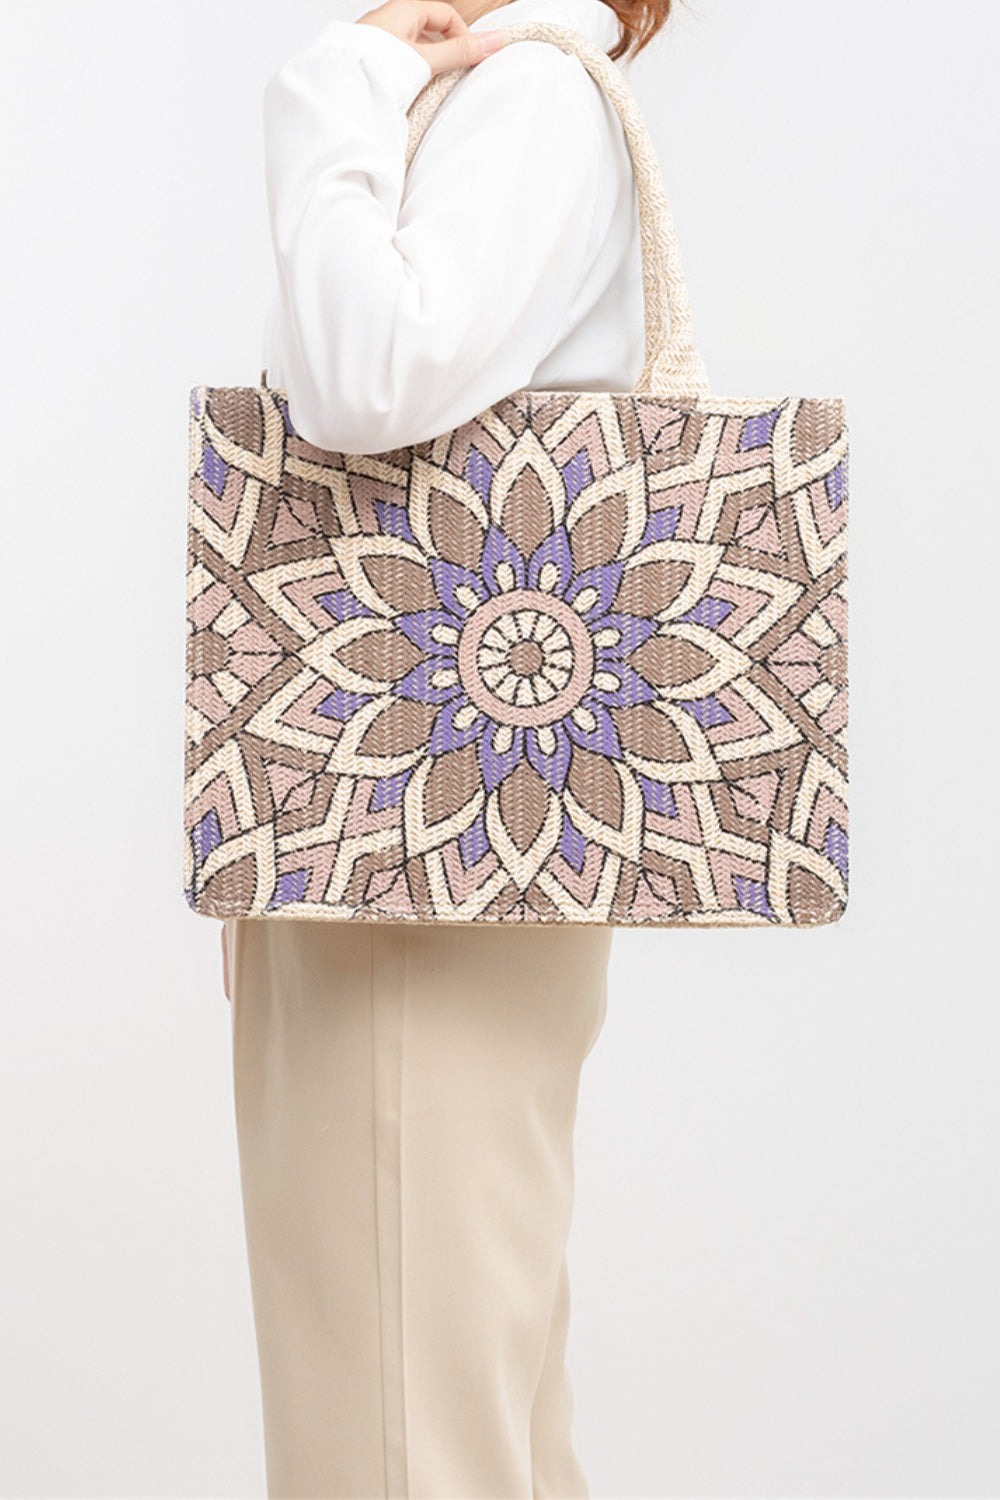 Stylish straw tote bag with eye-catching dyed design